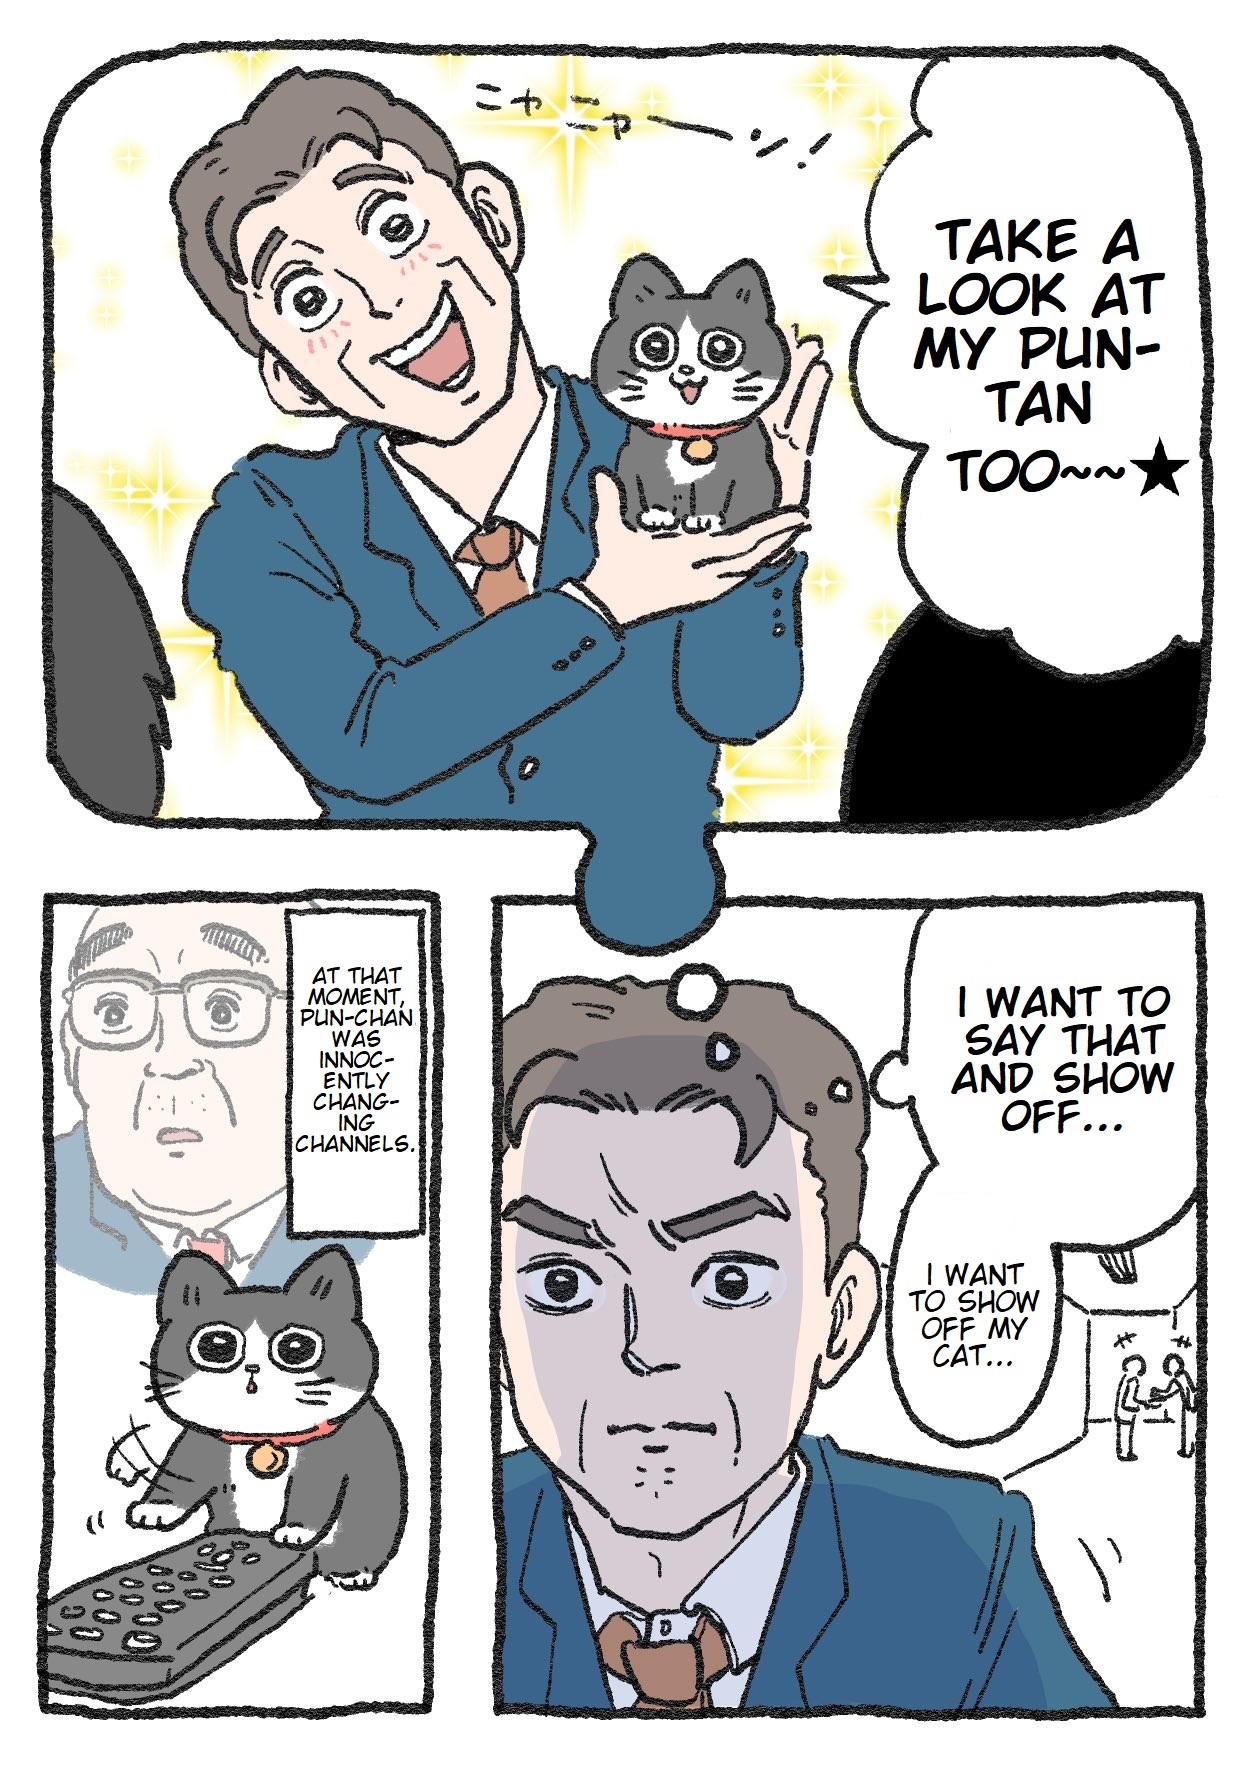 The Old Man Who Was Reincarnated As A Cat - Page 2